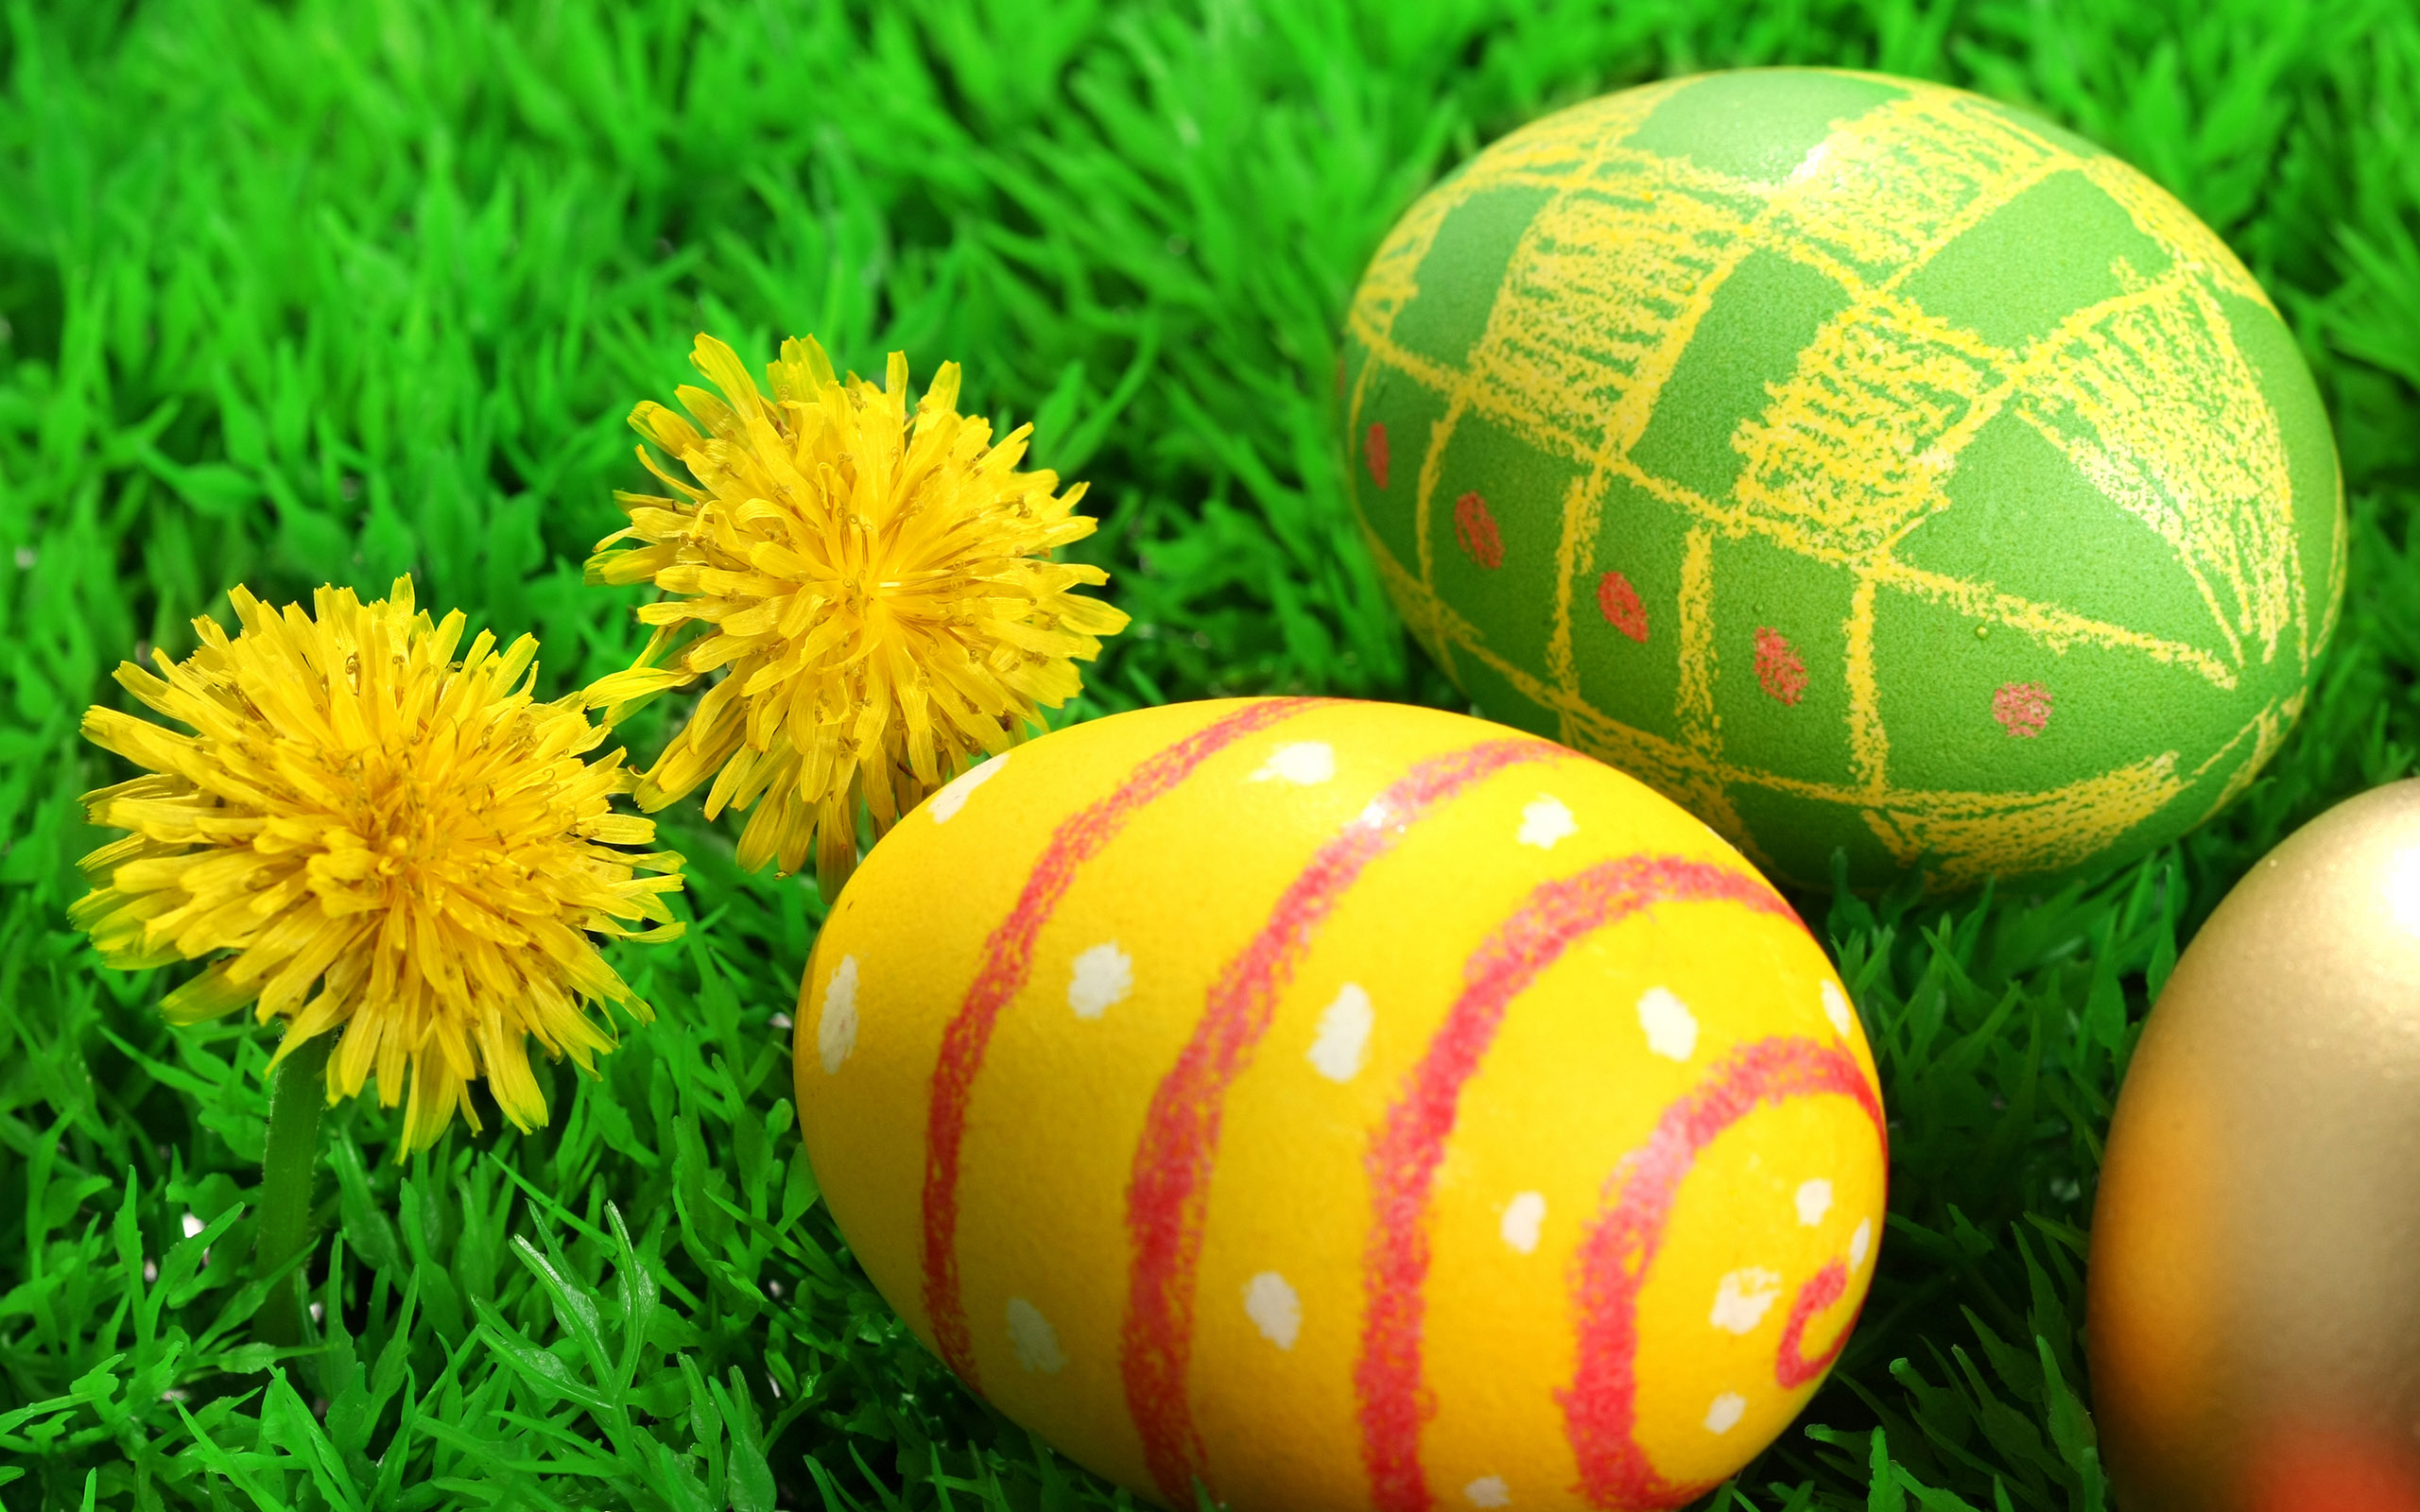  chicks and easter eggs wallpapers for your desktop backgrounds 2560x1600